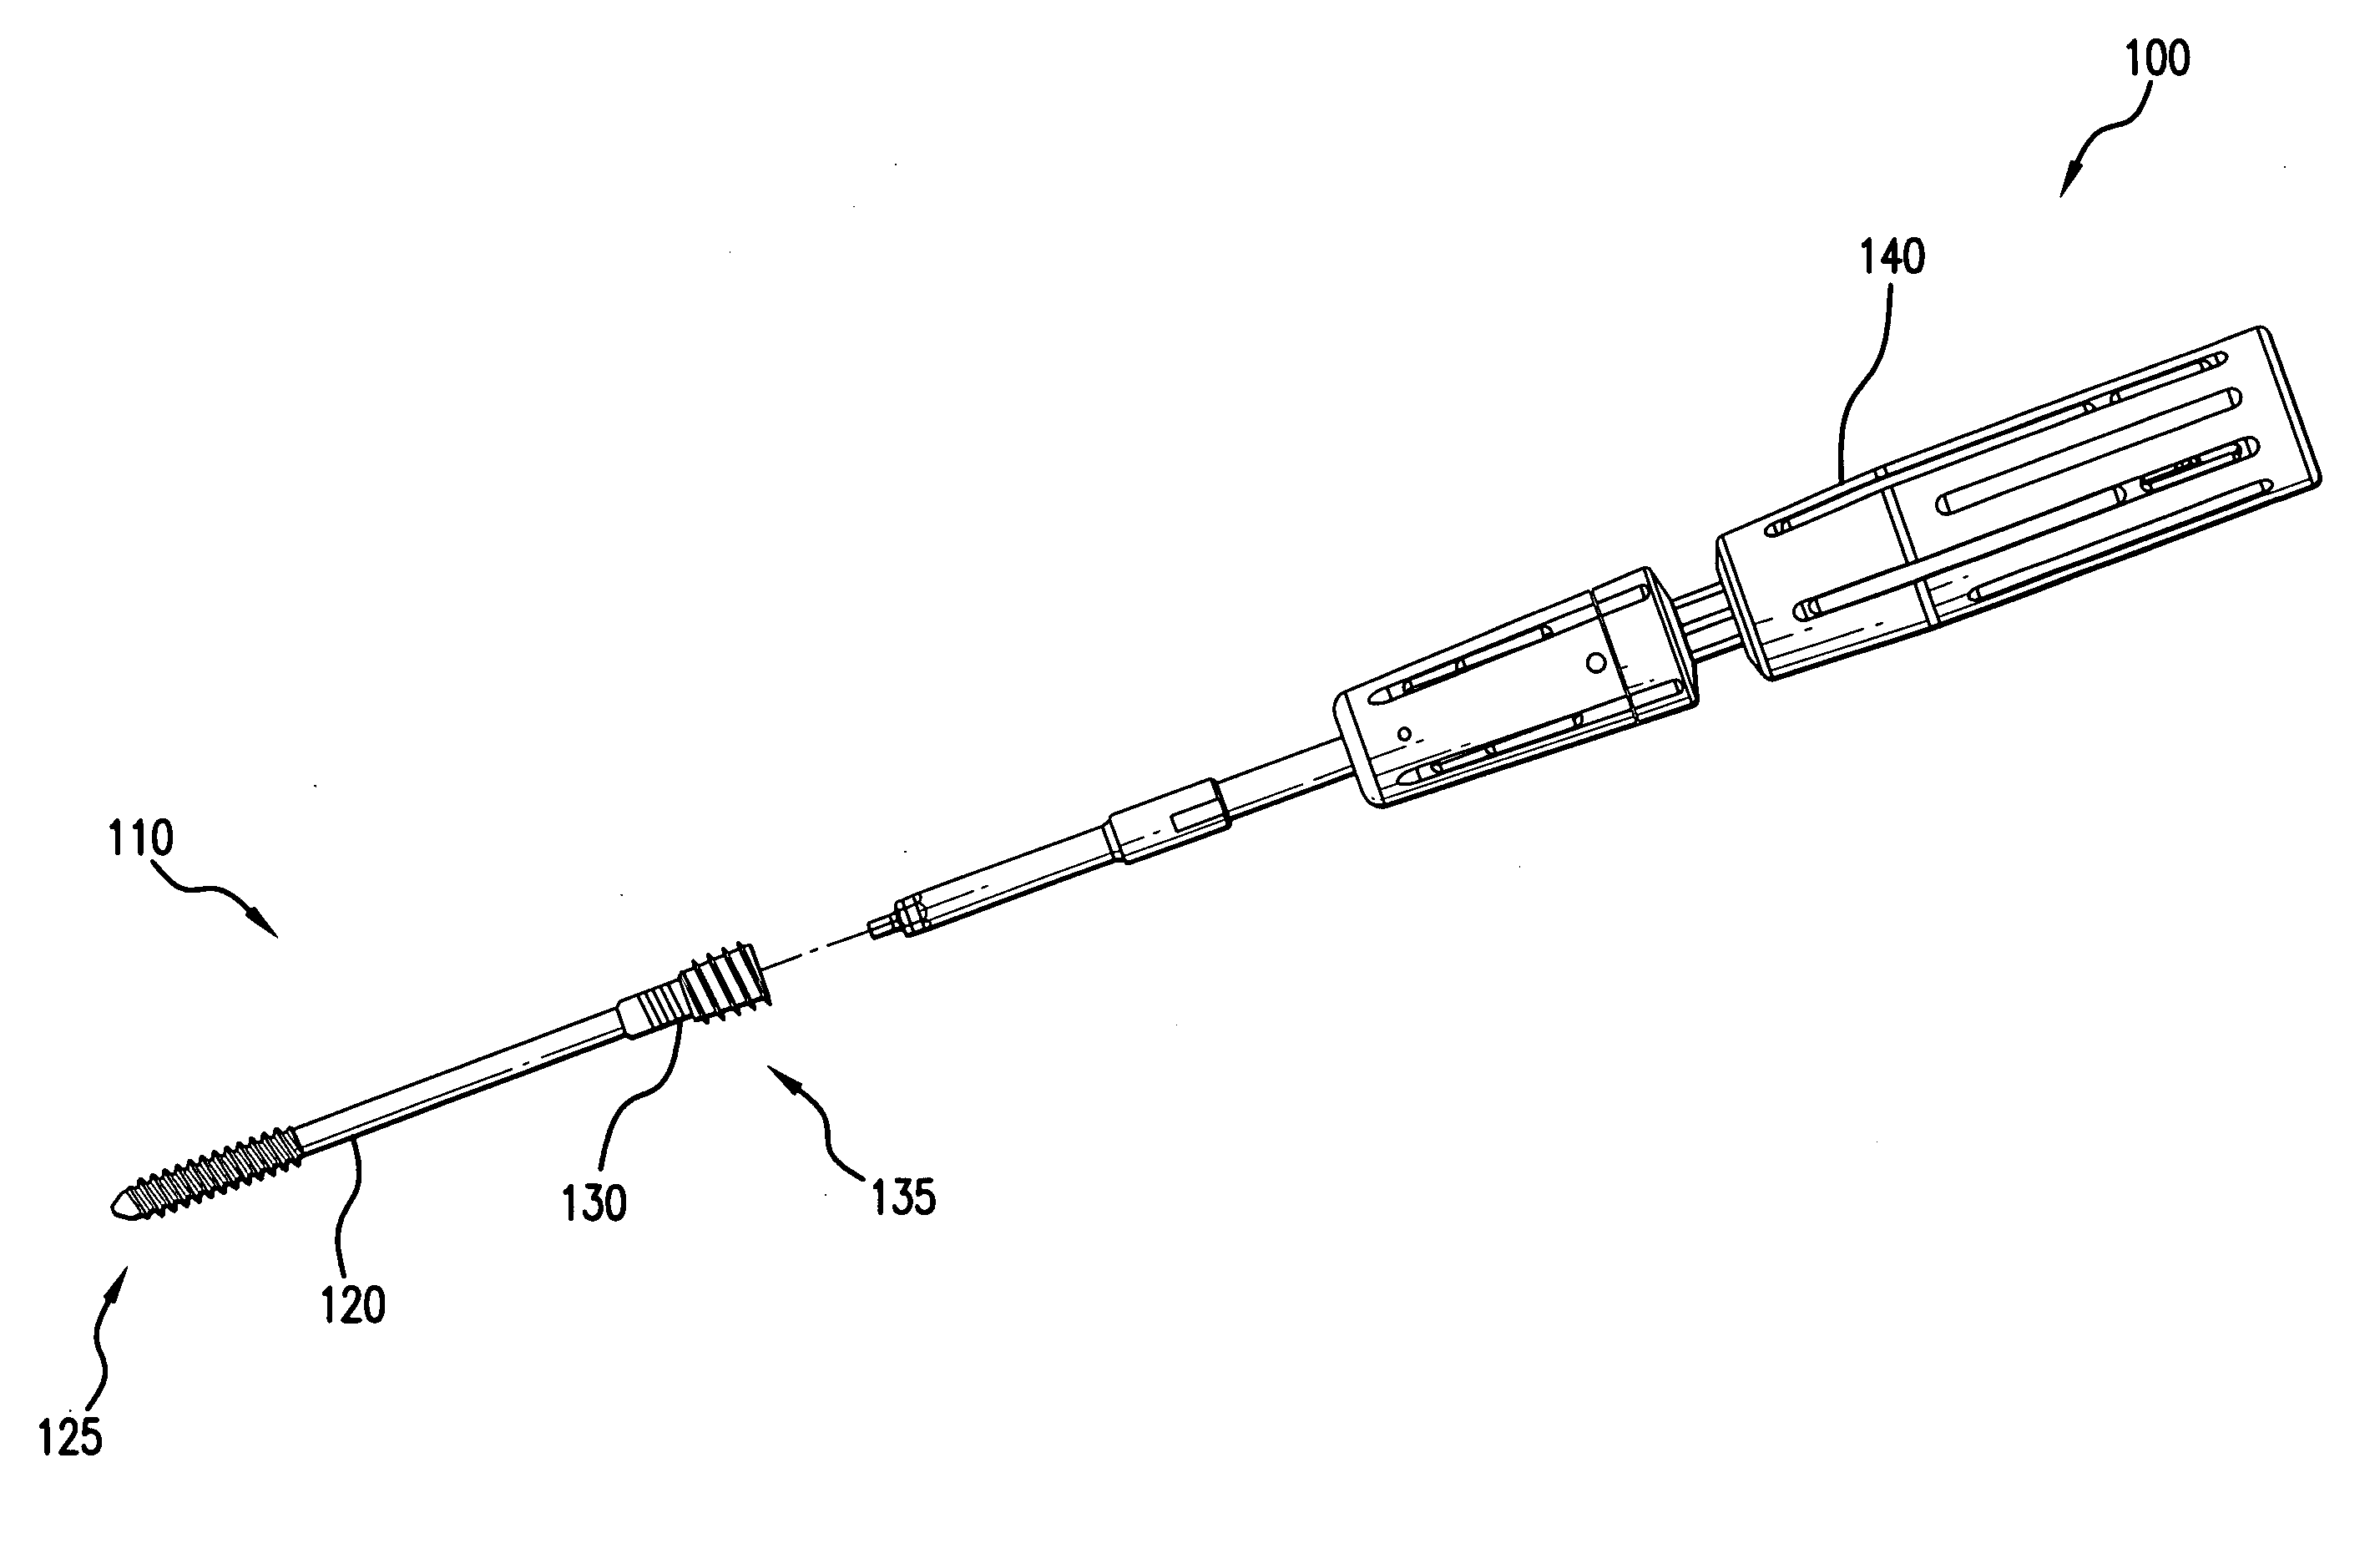 Compression screw assembly, an orthopedic fixation system including a compression screw assembly and method of use